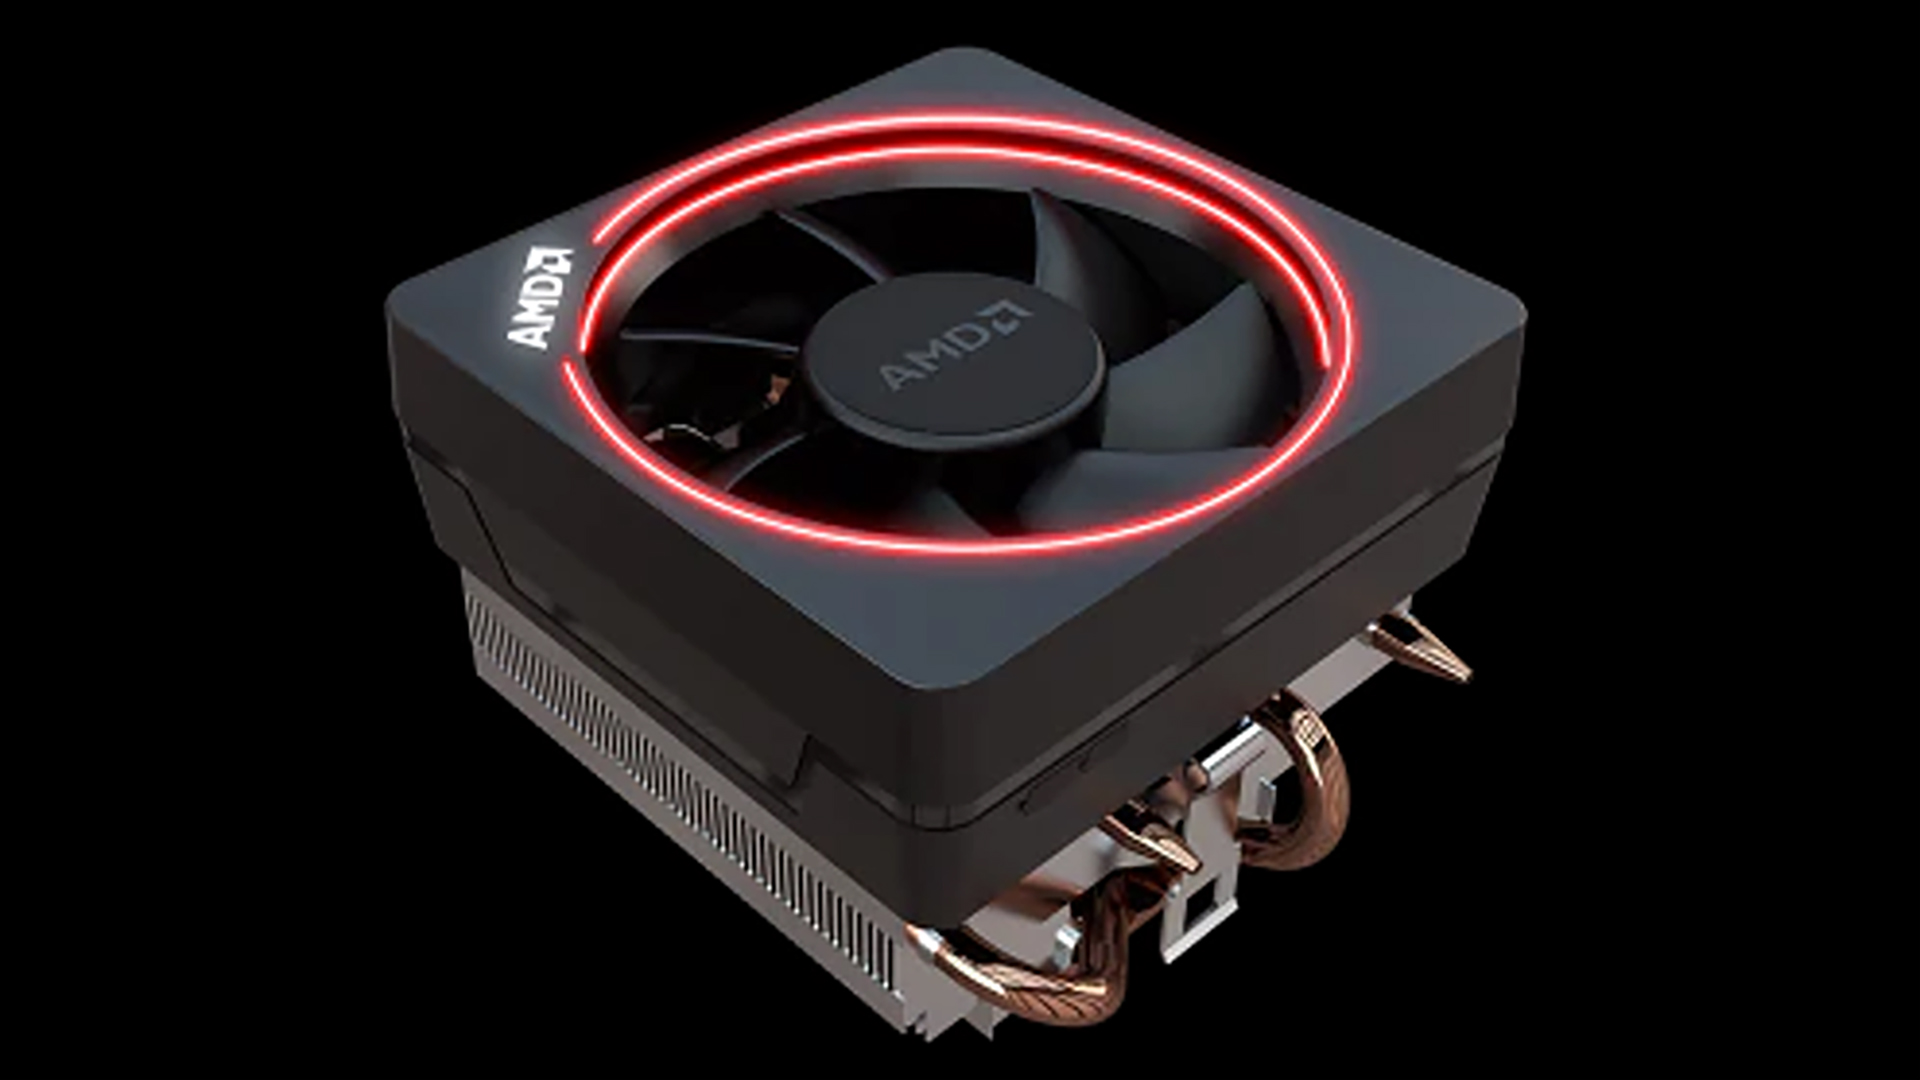 Amd S High End Ryzen 5000 Cpus Don T Come With Coolers Because They Re Optimised For Enthusiasts Pc Gamer